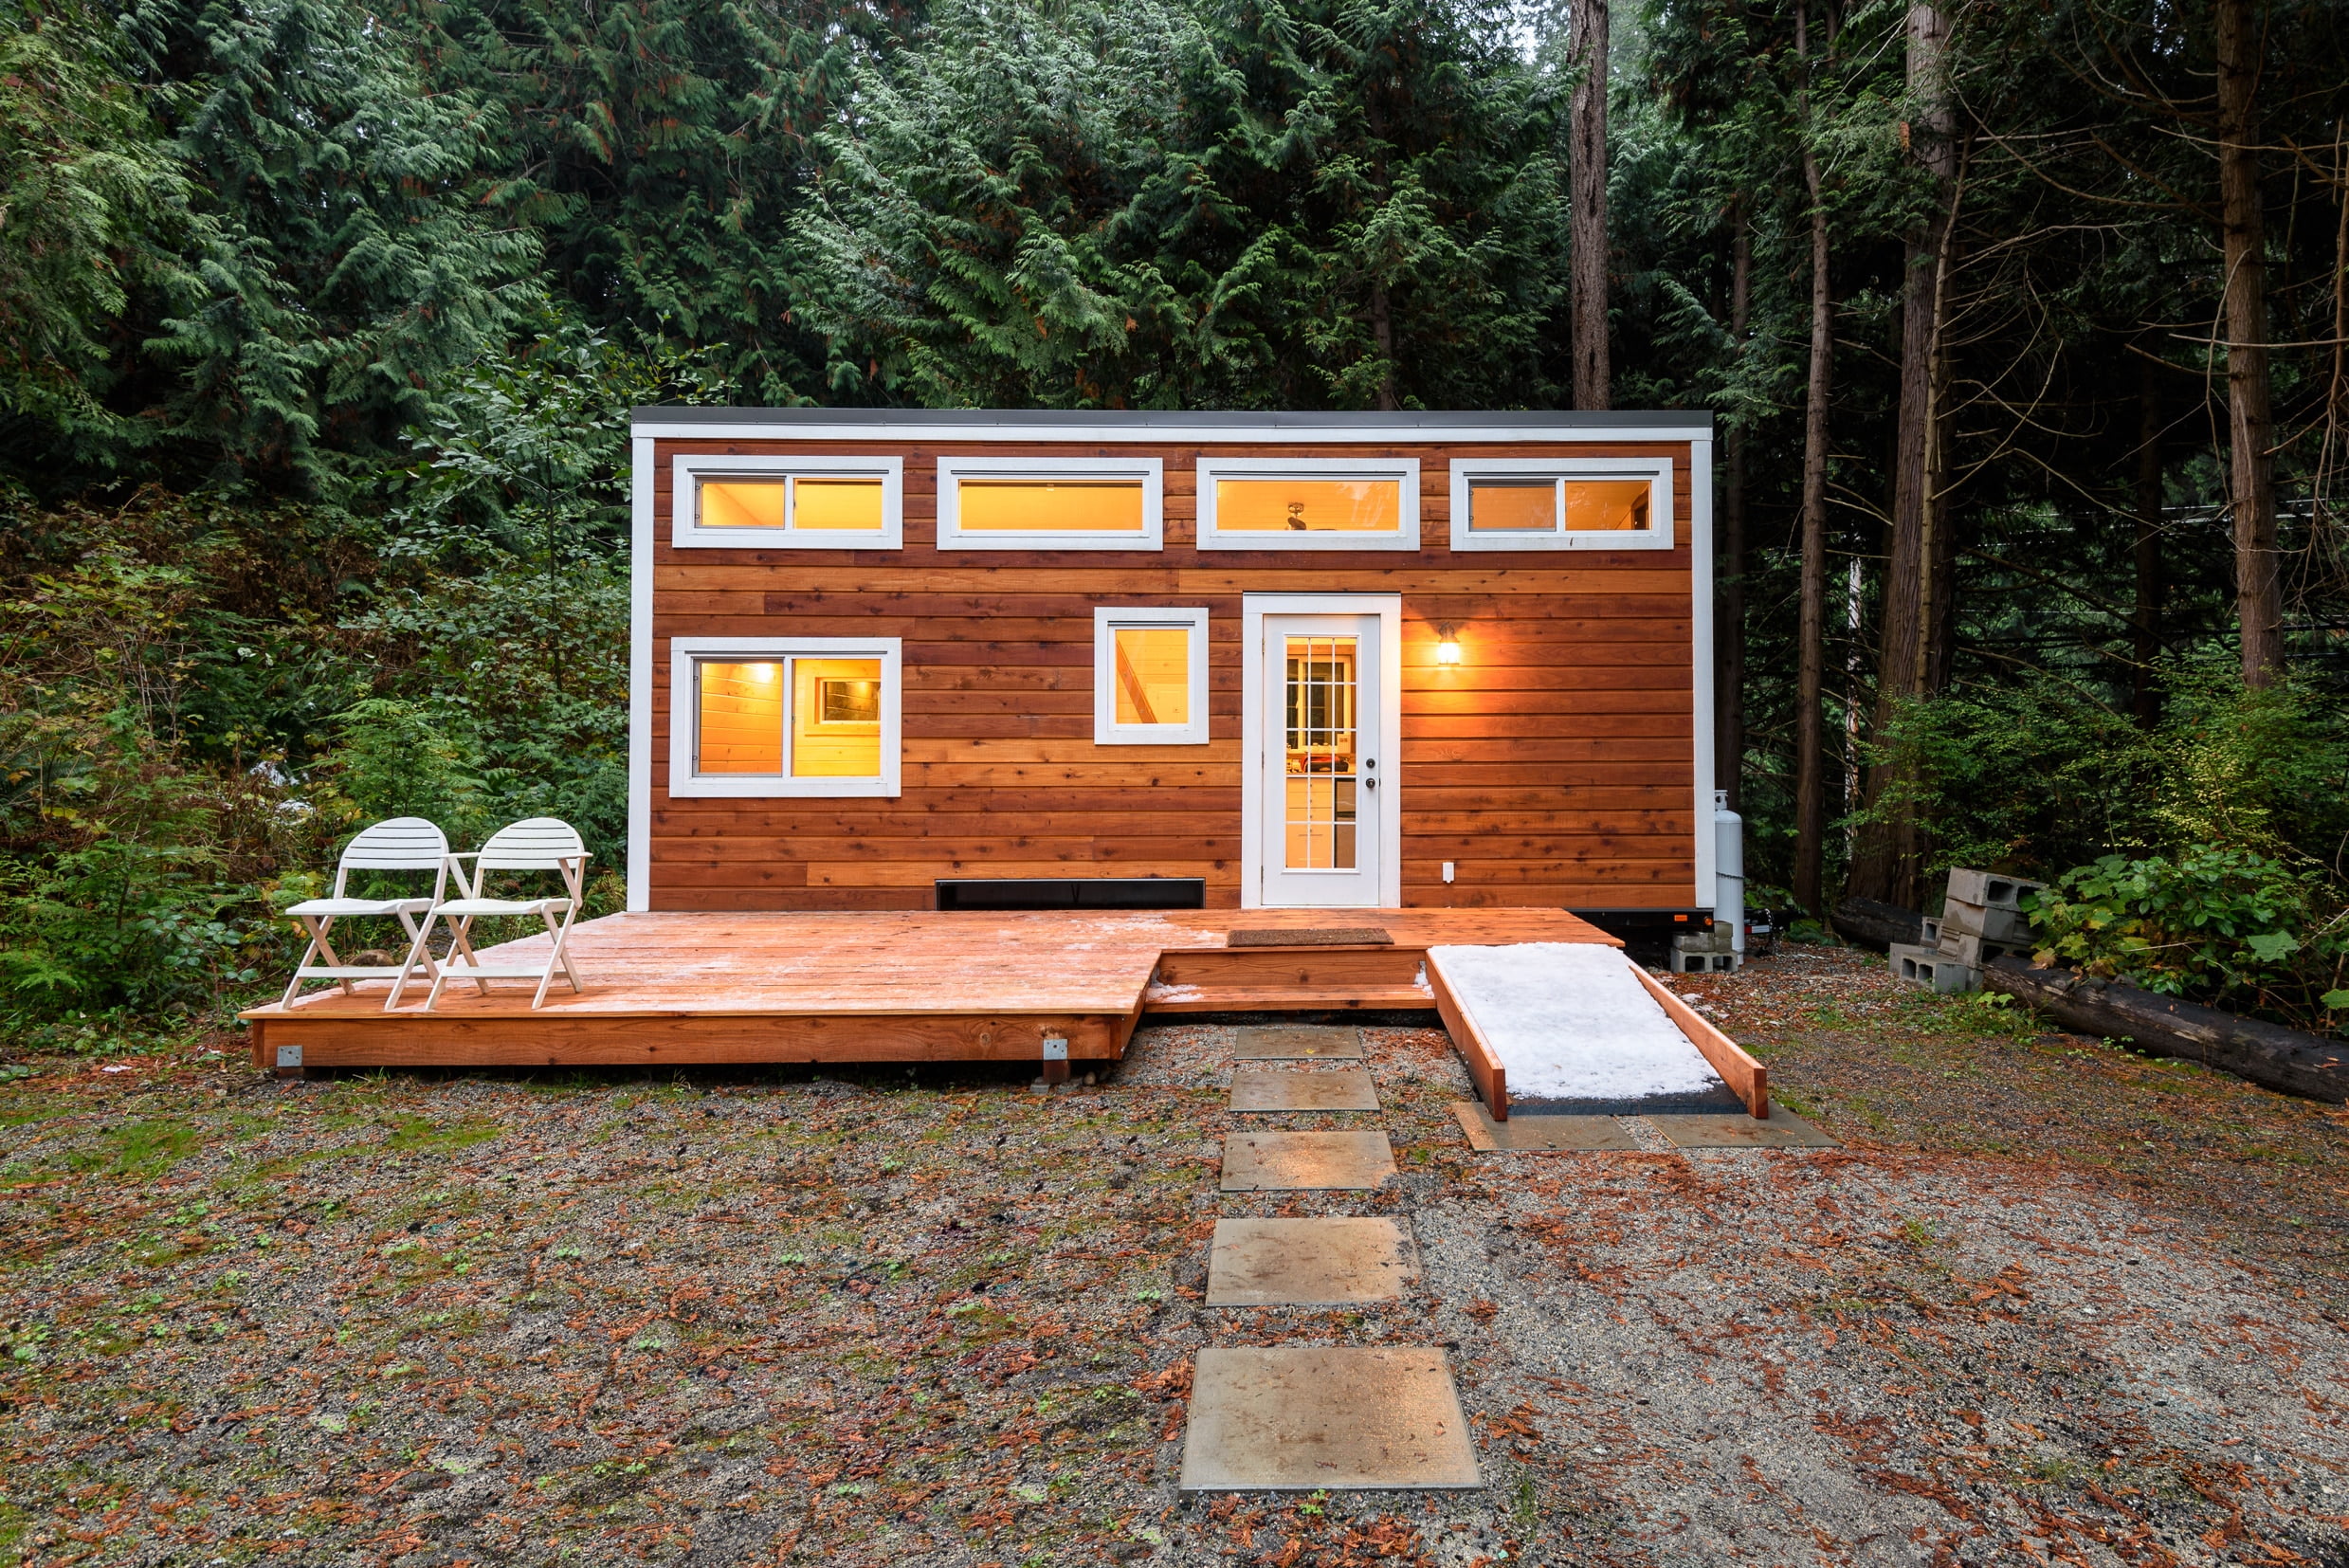 Invest in a tiny house airbnb rental